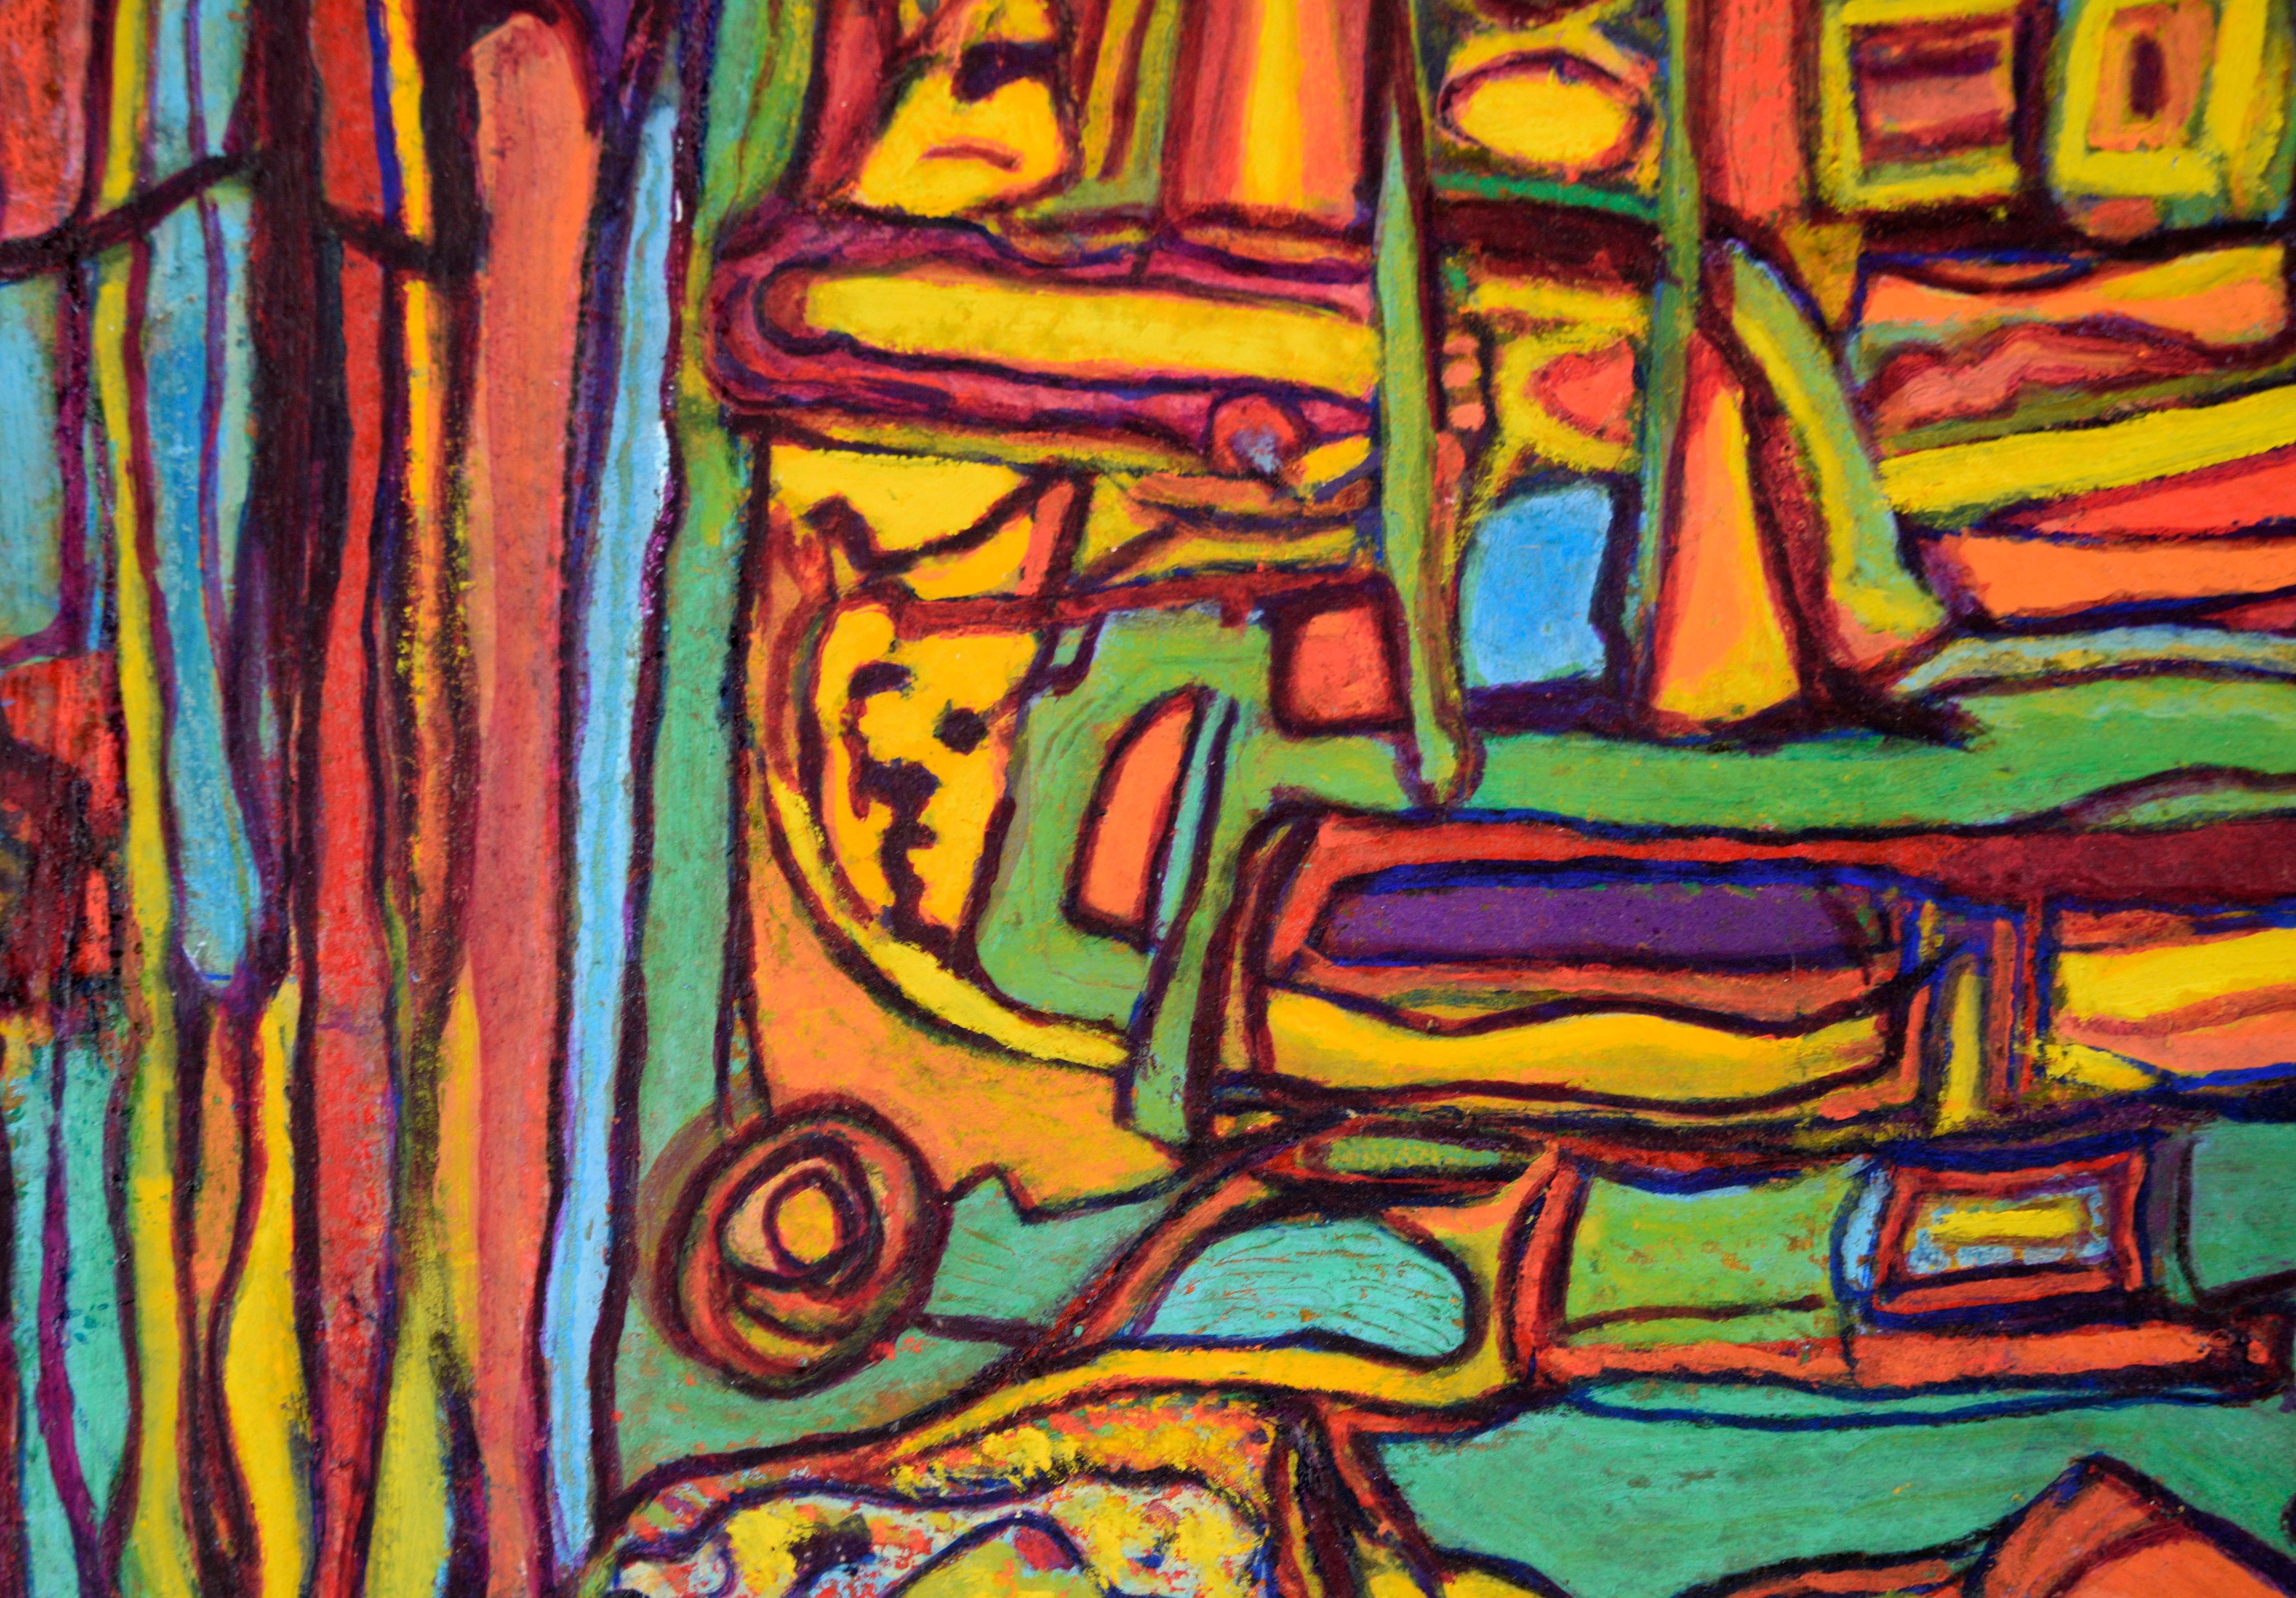 Psychedelic Abstract in Yellow, Teal, and Orange - Oil on Paper

Bright and colorful abstract by Jennie T. Rafton (American, b. 1925). Pattens and shapes spill across the paper, full of complexity and detail. The majority of the shapes are